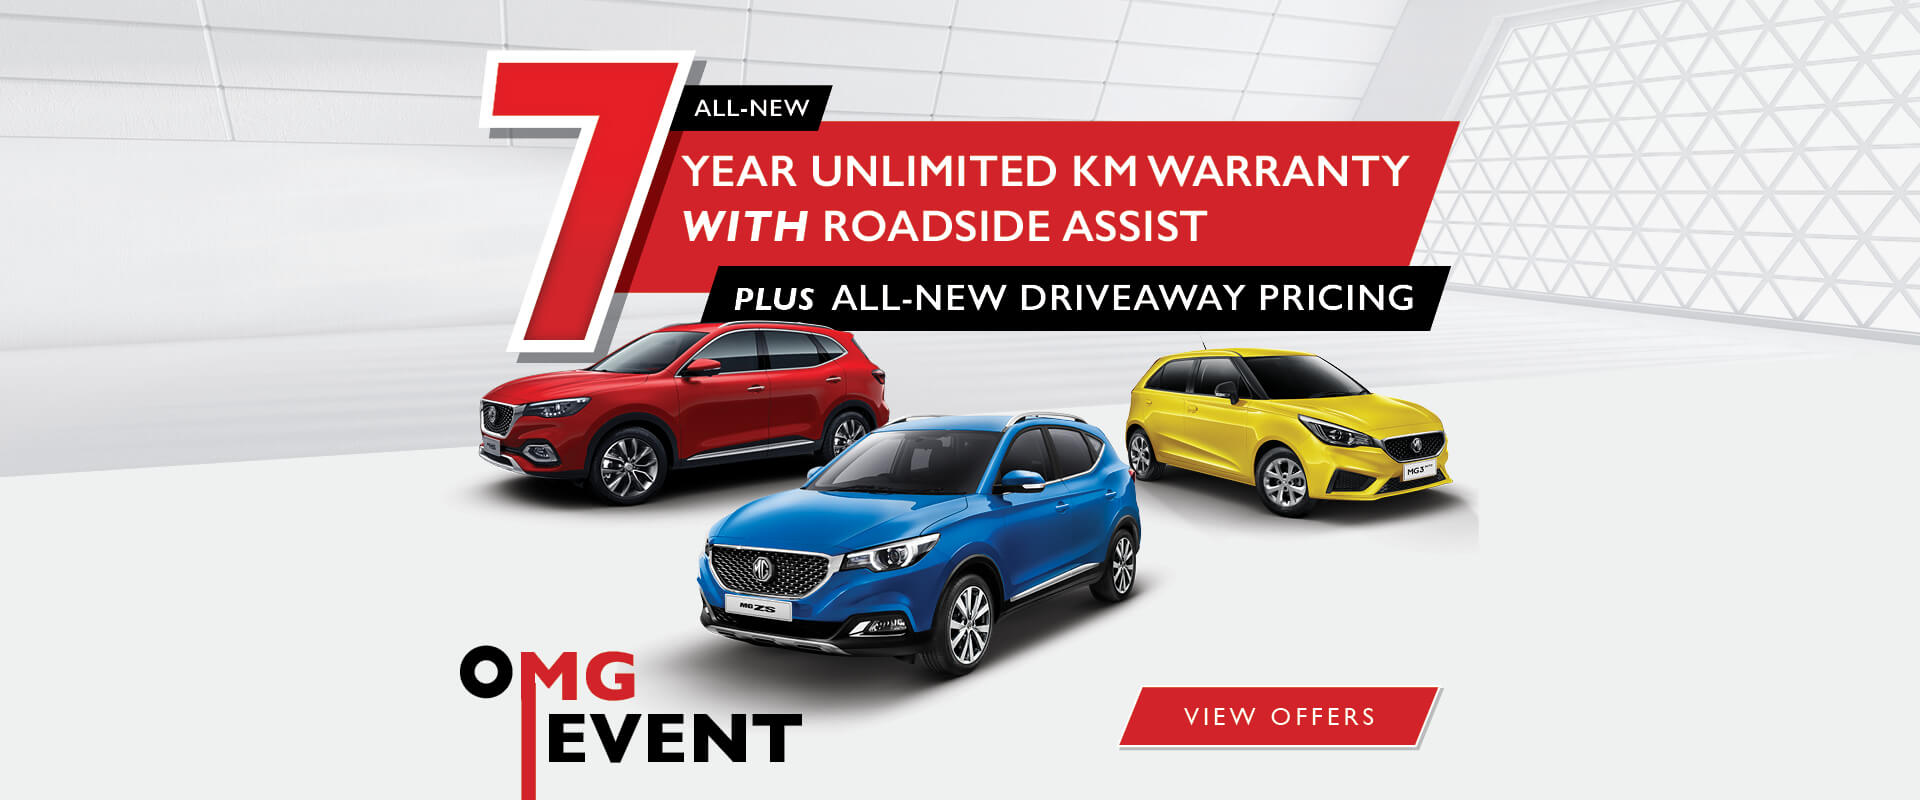 OMG Event. All-new 7 year unlimited km warranty with roadside assist plus all-new driveaway pricing. Find out more.